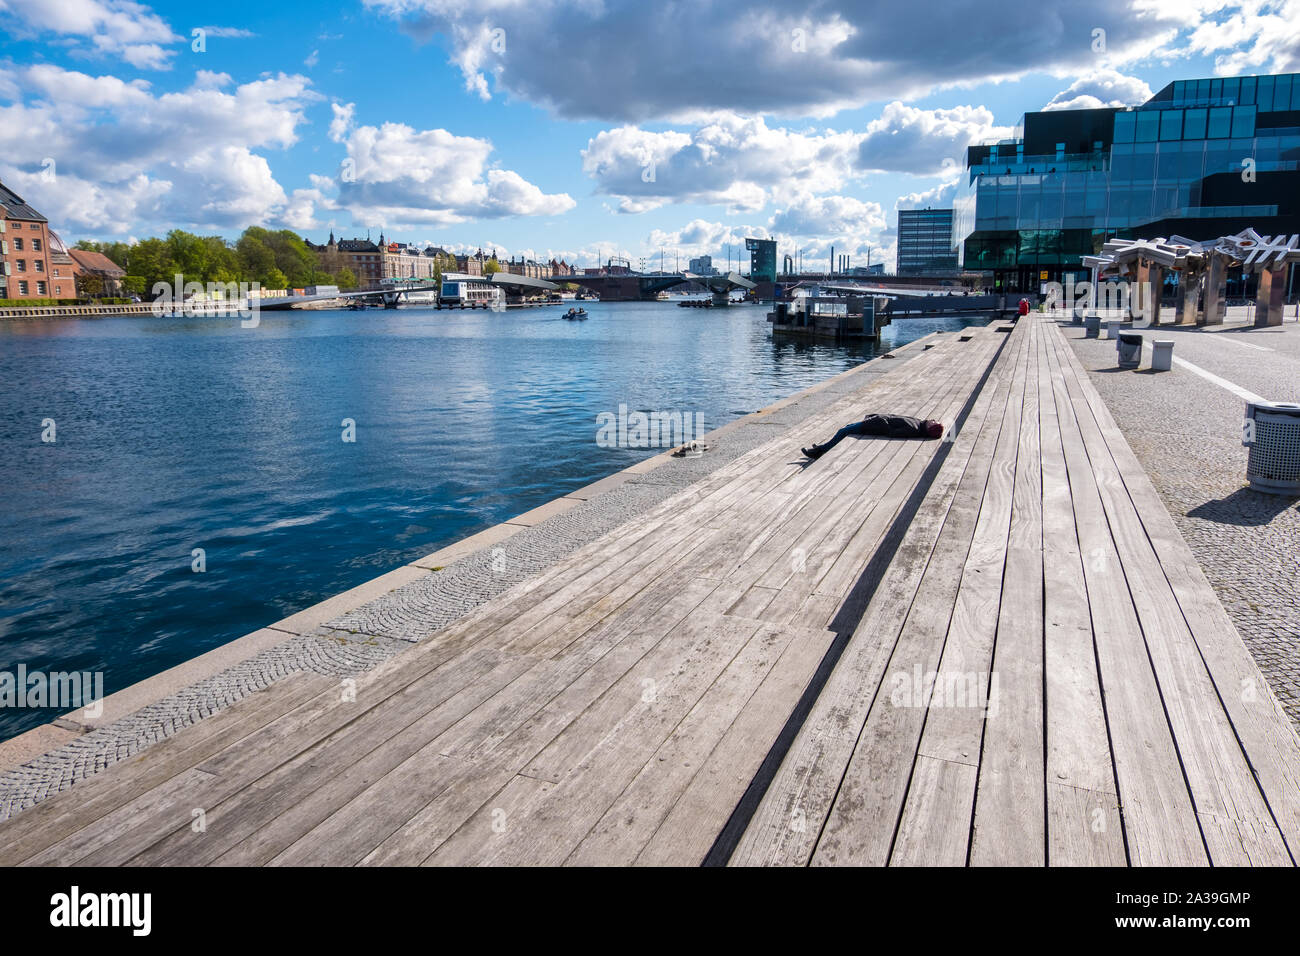 Copenhagen, Denmark - May 04, 2019: People relax on one of the waterfronts near the BLOX - Danish Architecture Center in Copenhagen Stock Photo